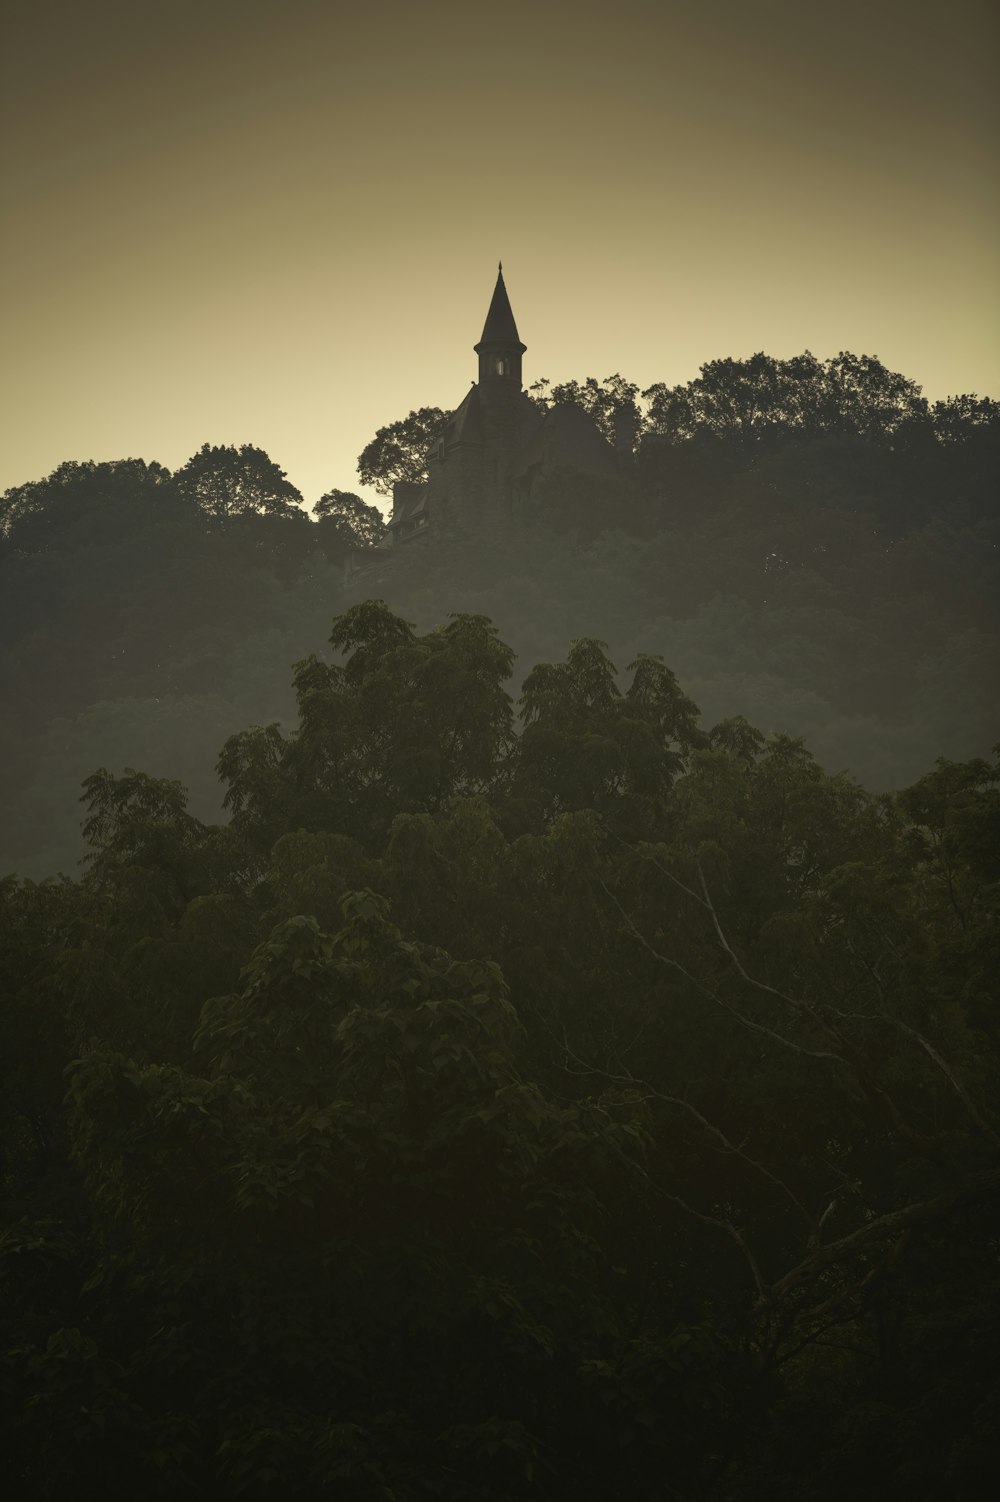 a clock tower on top of a hill surrounded by trees